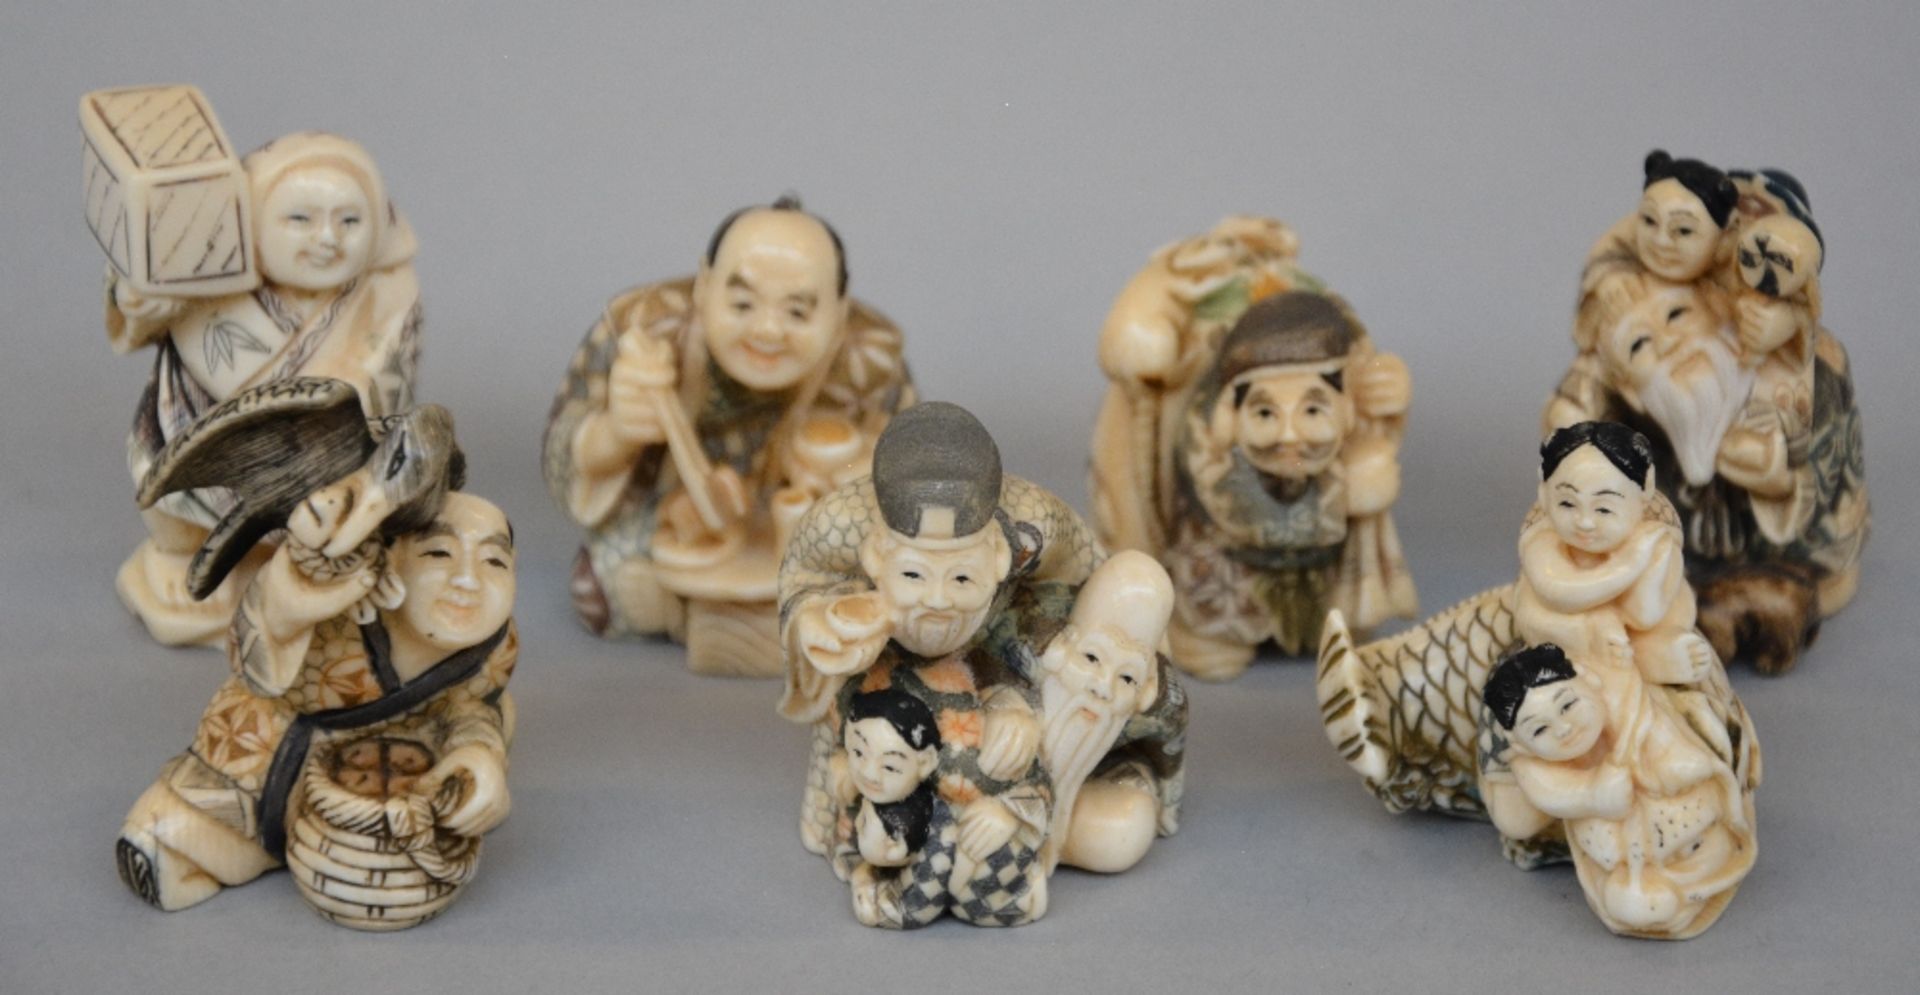 Seven ivory netsuke/okimino, scrimshaw decorated, first half of 20thC, H 5,2 - 4,1 cm, Total